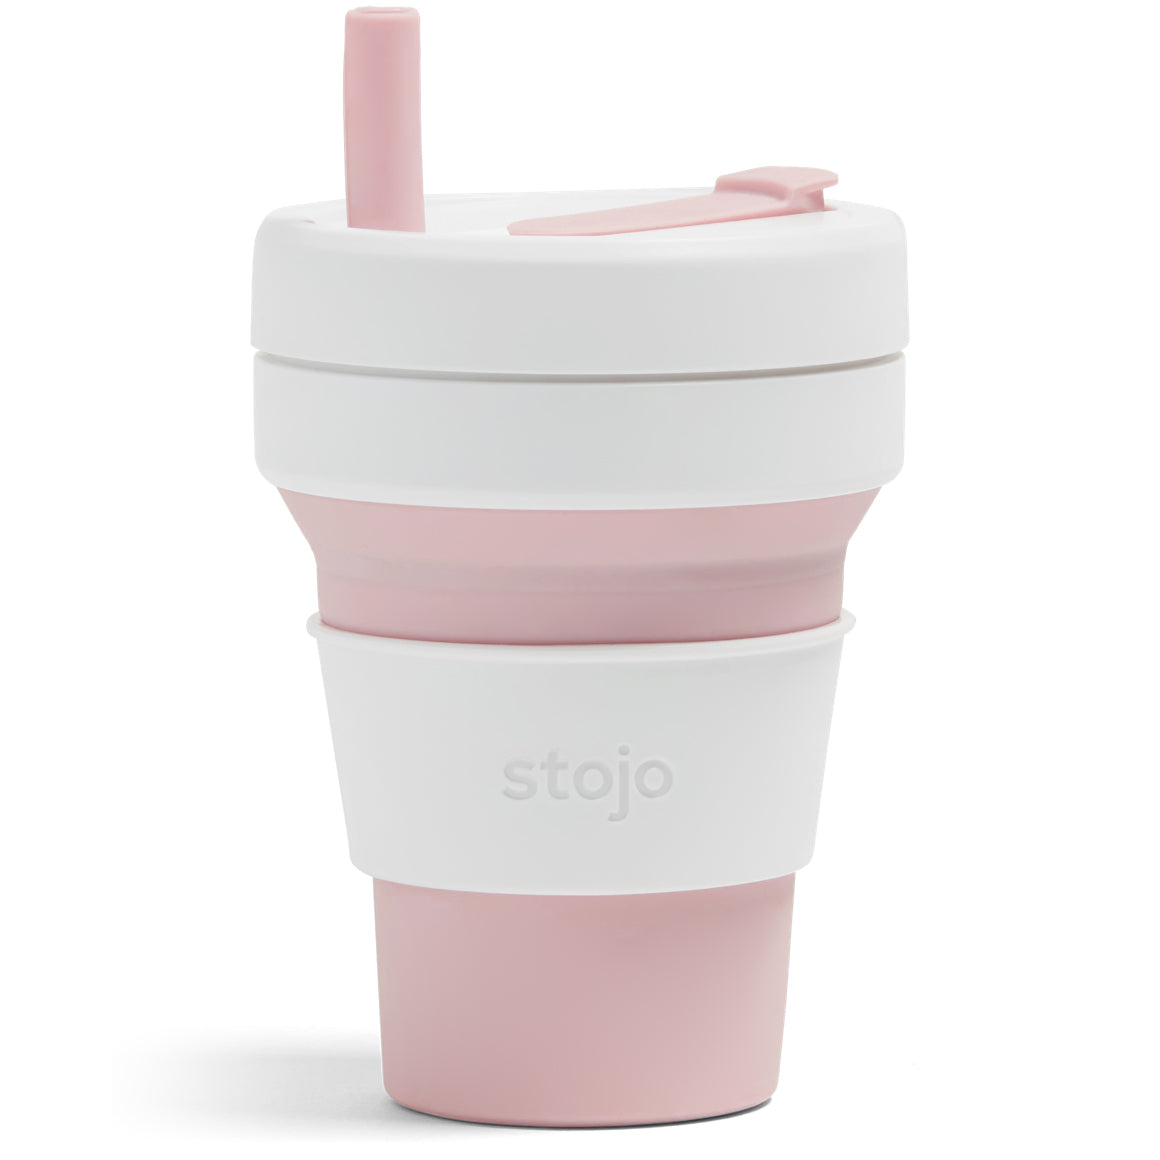 https://ecobeige.com/cdn/shop/products/Stojo-16-oz-cup-rose-pink-white-collapsable-reusable-platinum-silicone-cup-on-the-go-sustainable-endless-use-waste-free-alternative-vancouver-Eco-Beige-1_959a7817-bd19-4397-b45e-3ec0c3141498_1200x1200.jpg?v=1654306022